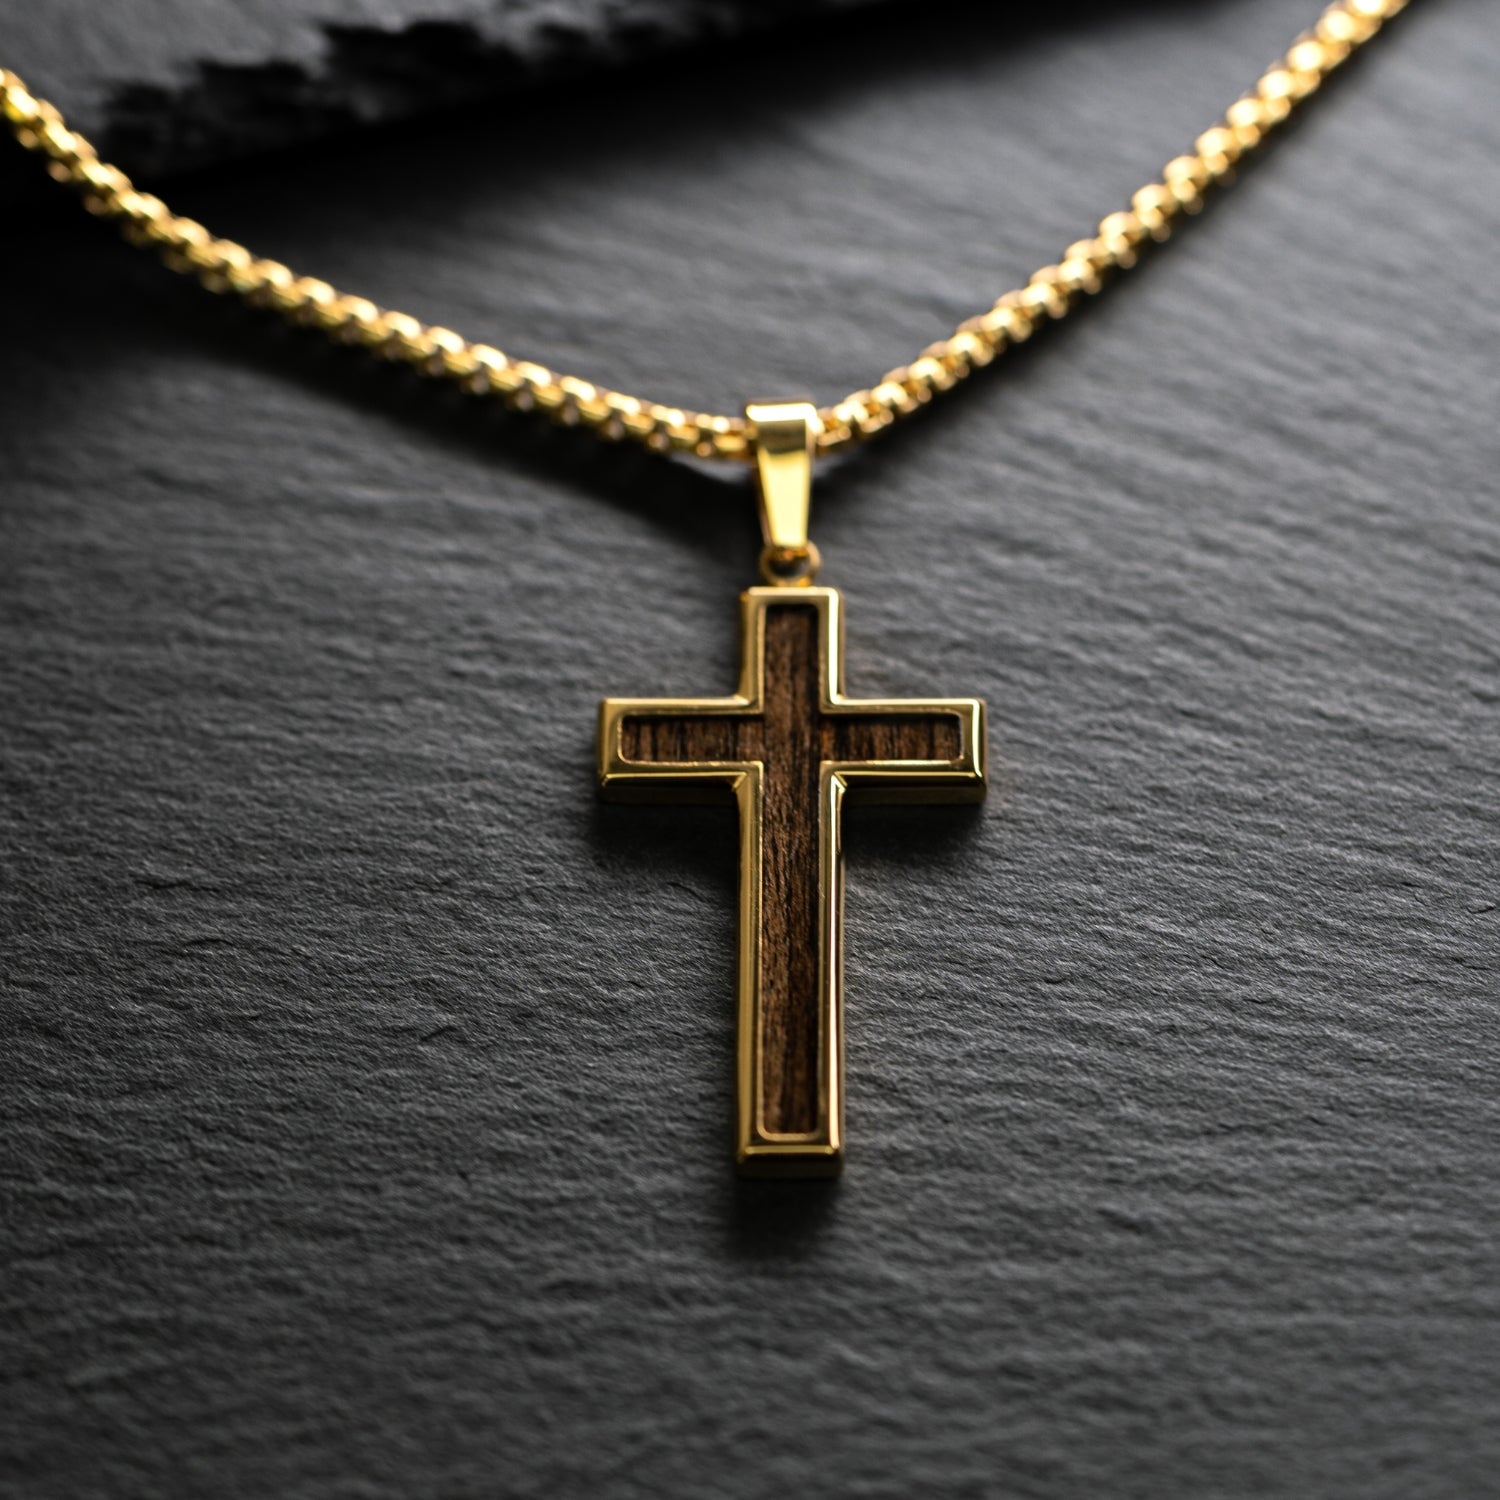 18k Gold Cross Necklace Gold Cross Necklace Stainless Steel Men Gold Cross  Pendant Christian Jewelry Gift for Him Gift for Boyfriend - Etsy